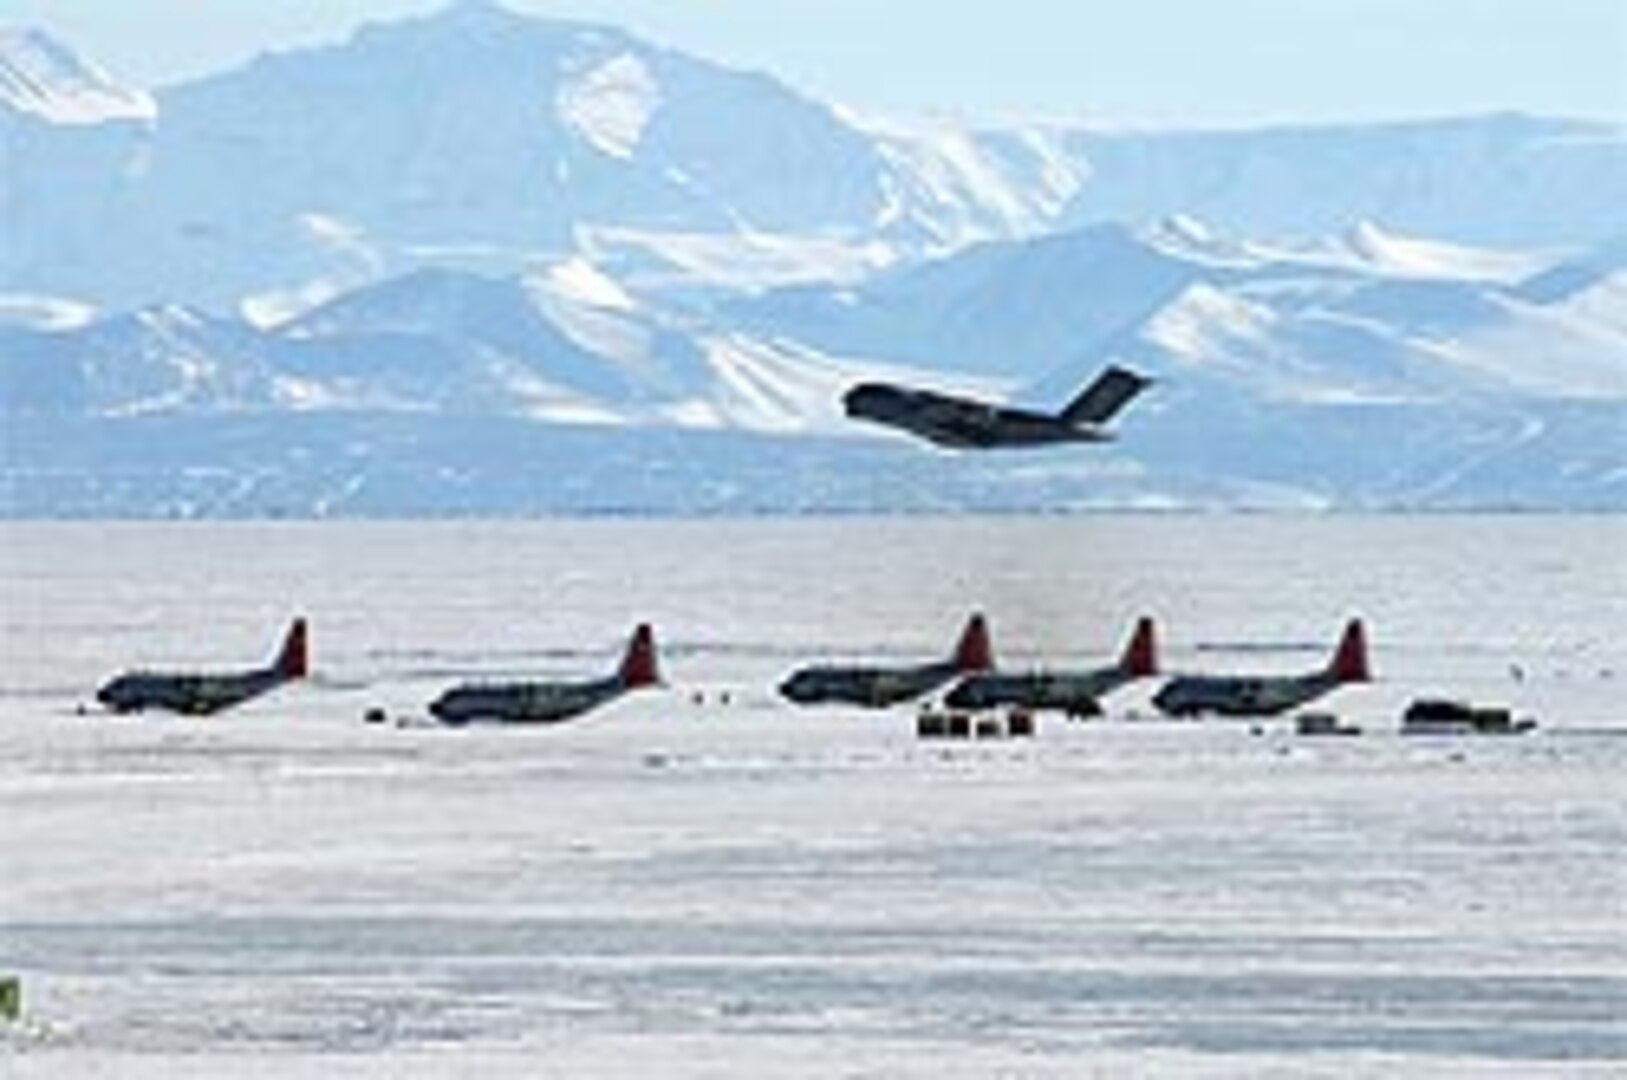 A C-17 cargo jet takes off from an ice runway at McMurdo Station in Antarctica over five LC-130s parked on a sea ice ramp.